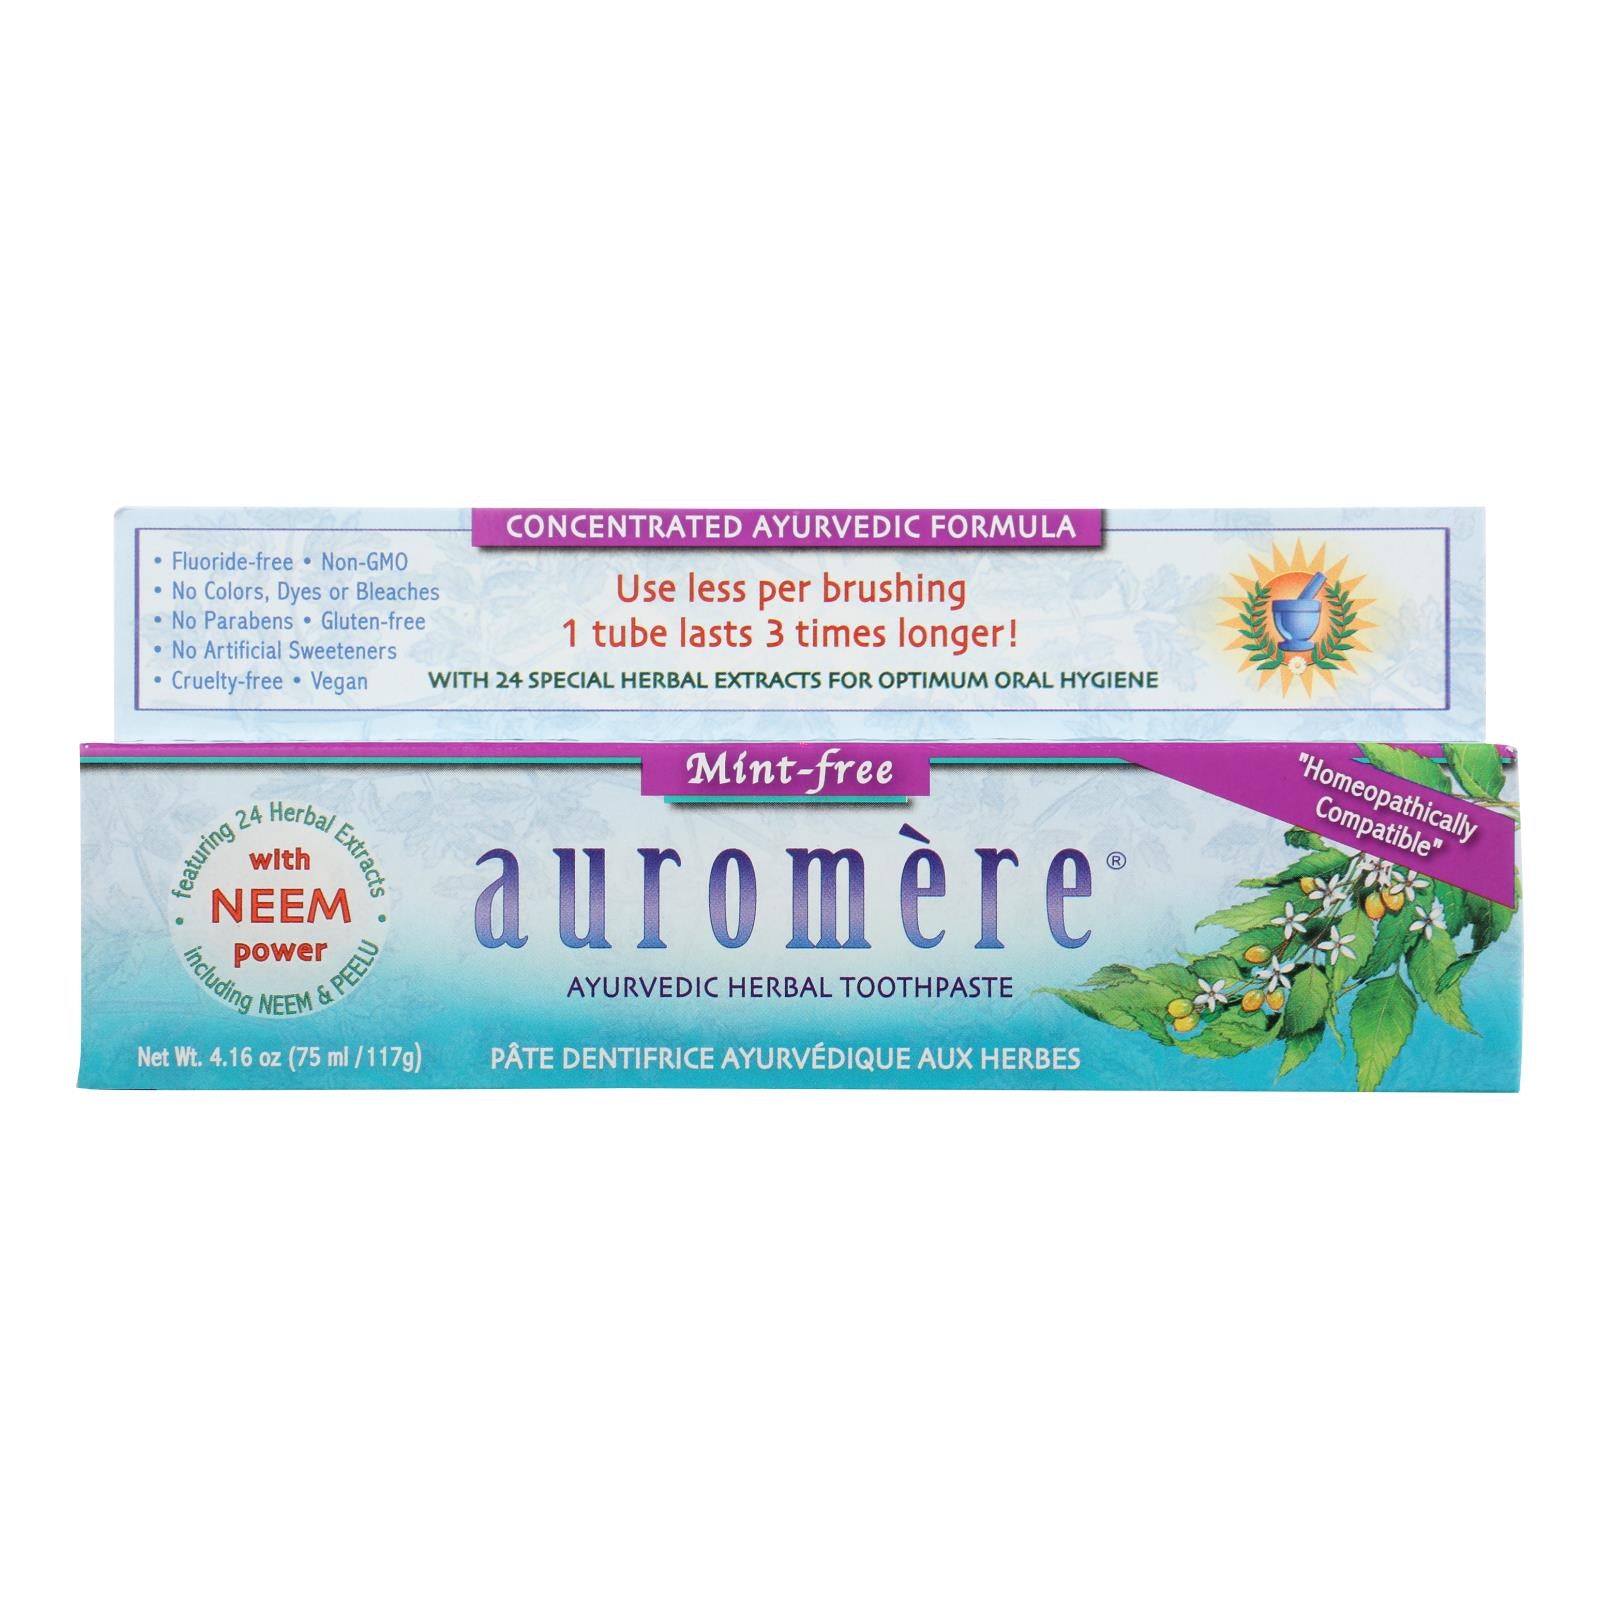 Auromere Toothpaste - Mint-free - Case Of 1 - 4.16 Oz.